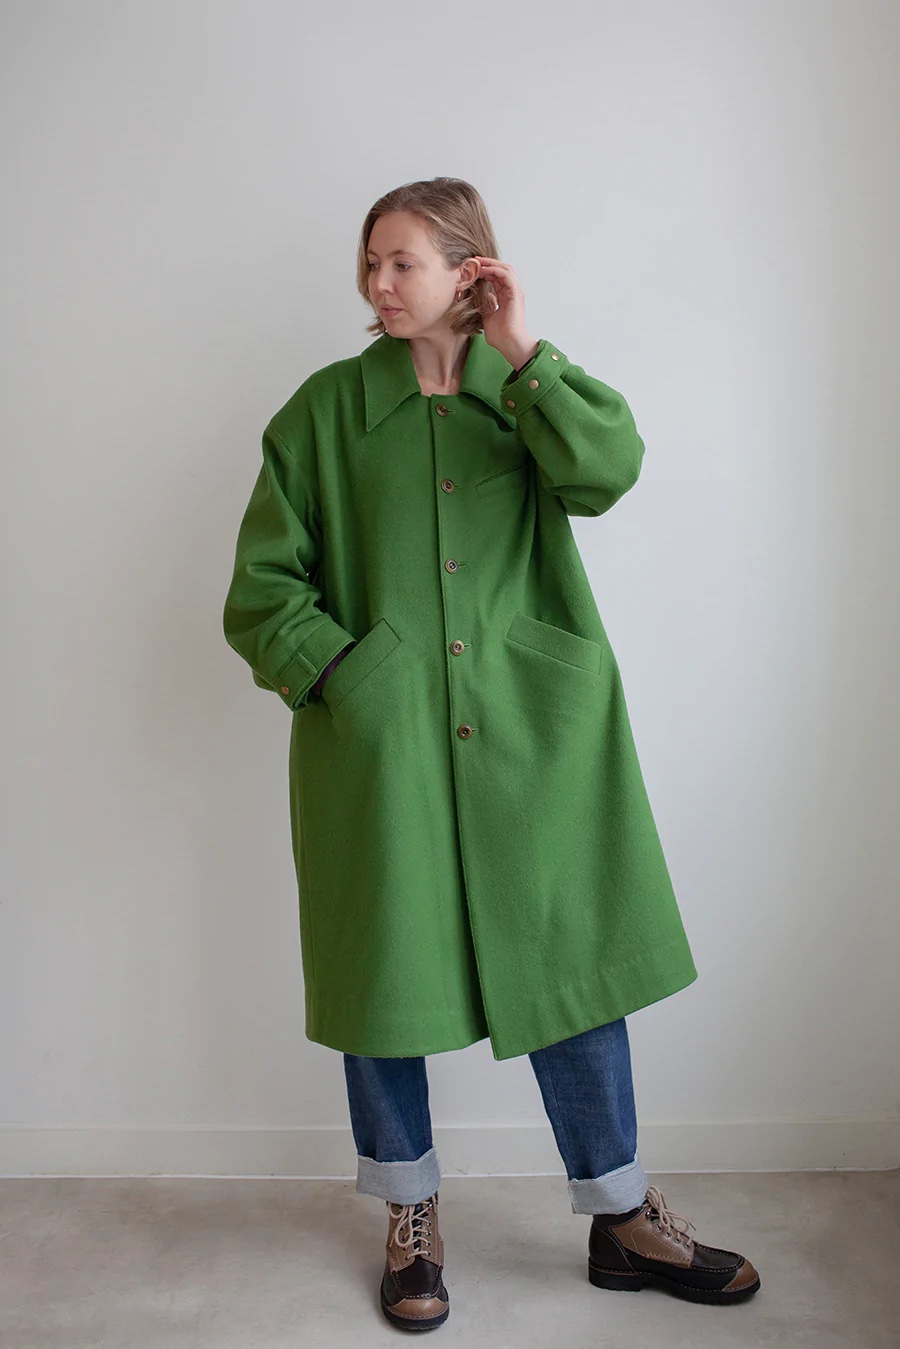 Woman wearing the Darcy Coat sewing pattern from The Modern Sewing Co on The Fold Line. A coat pattern made in wool, waxed cotton, linen/hemp, gabardine, denim fabrics featuring an oversized fit, dropped shoulder, deep armholes, wide sleeves, wide main body, welt pockets, front button closure, collar and cuffs.